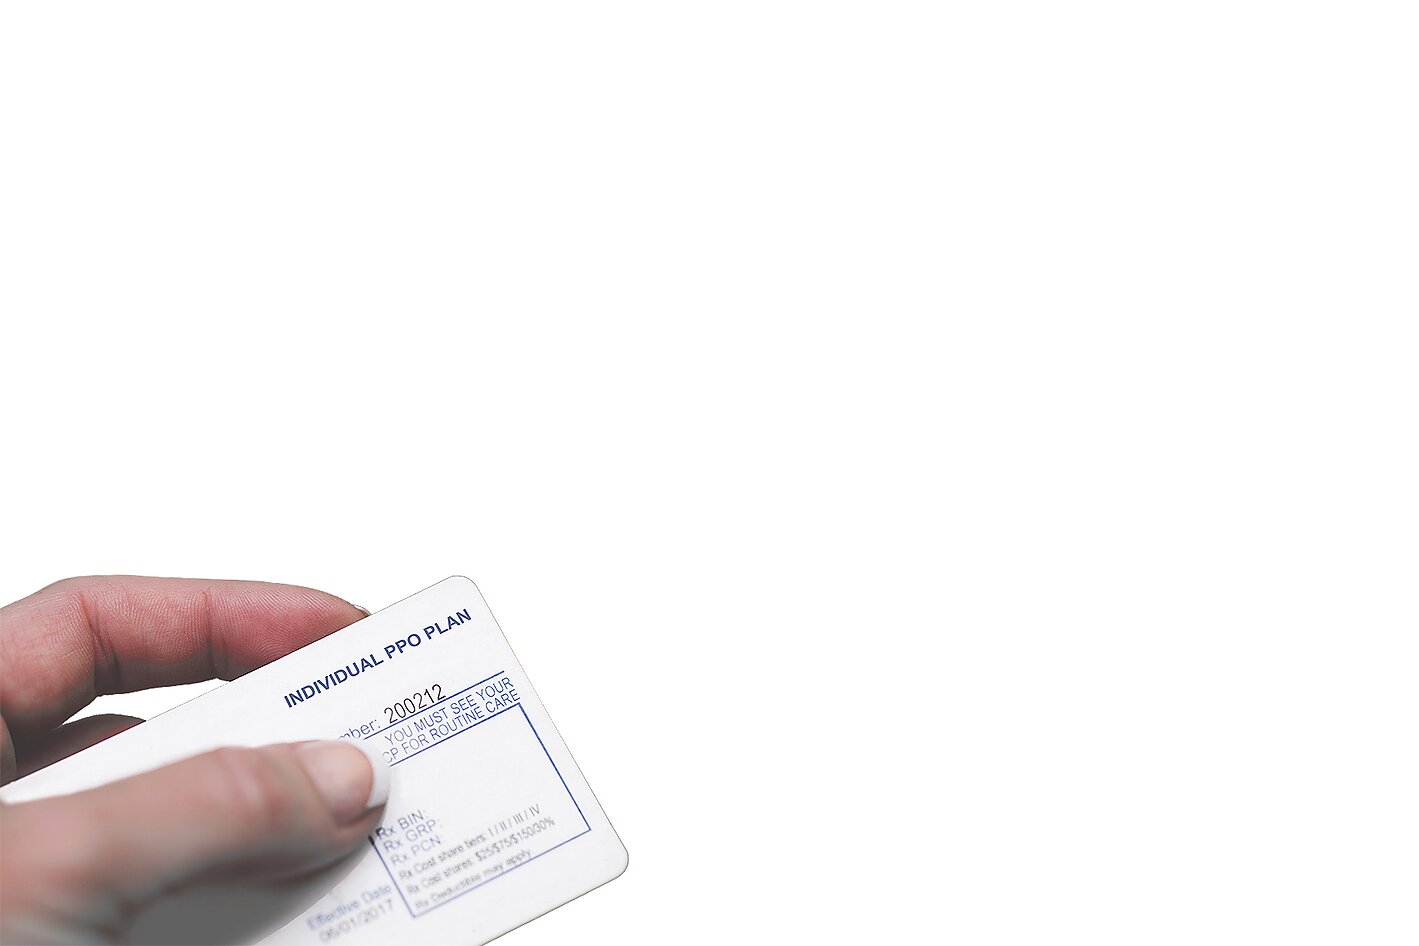 A hand holding a US health insurance card (Individual PPO Plan).